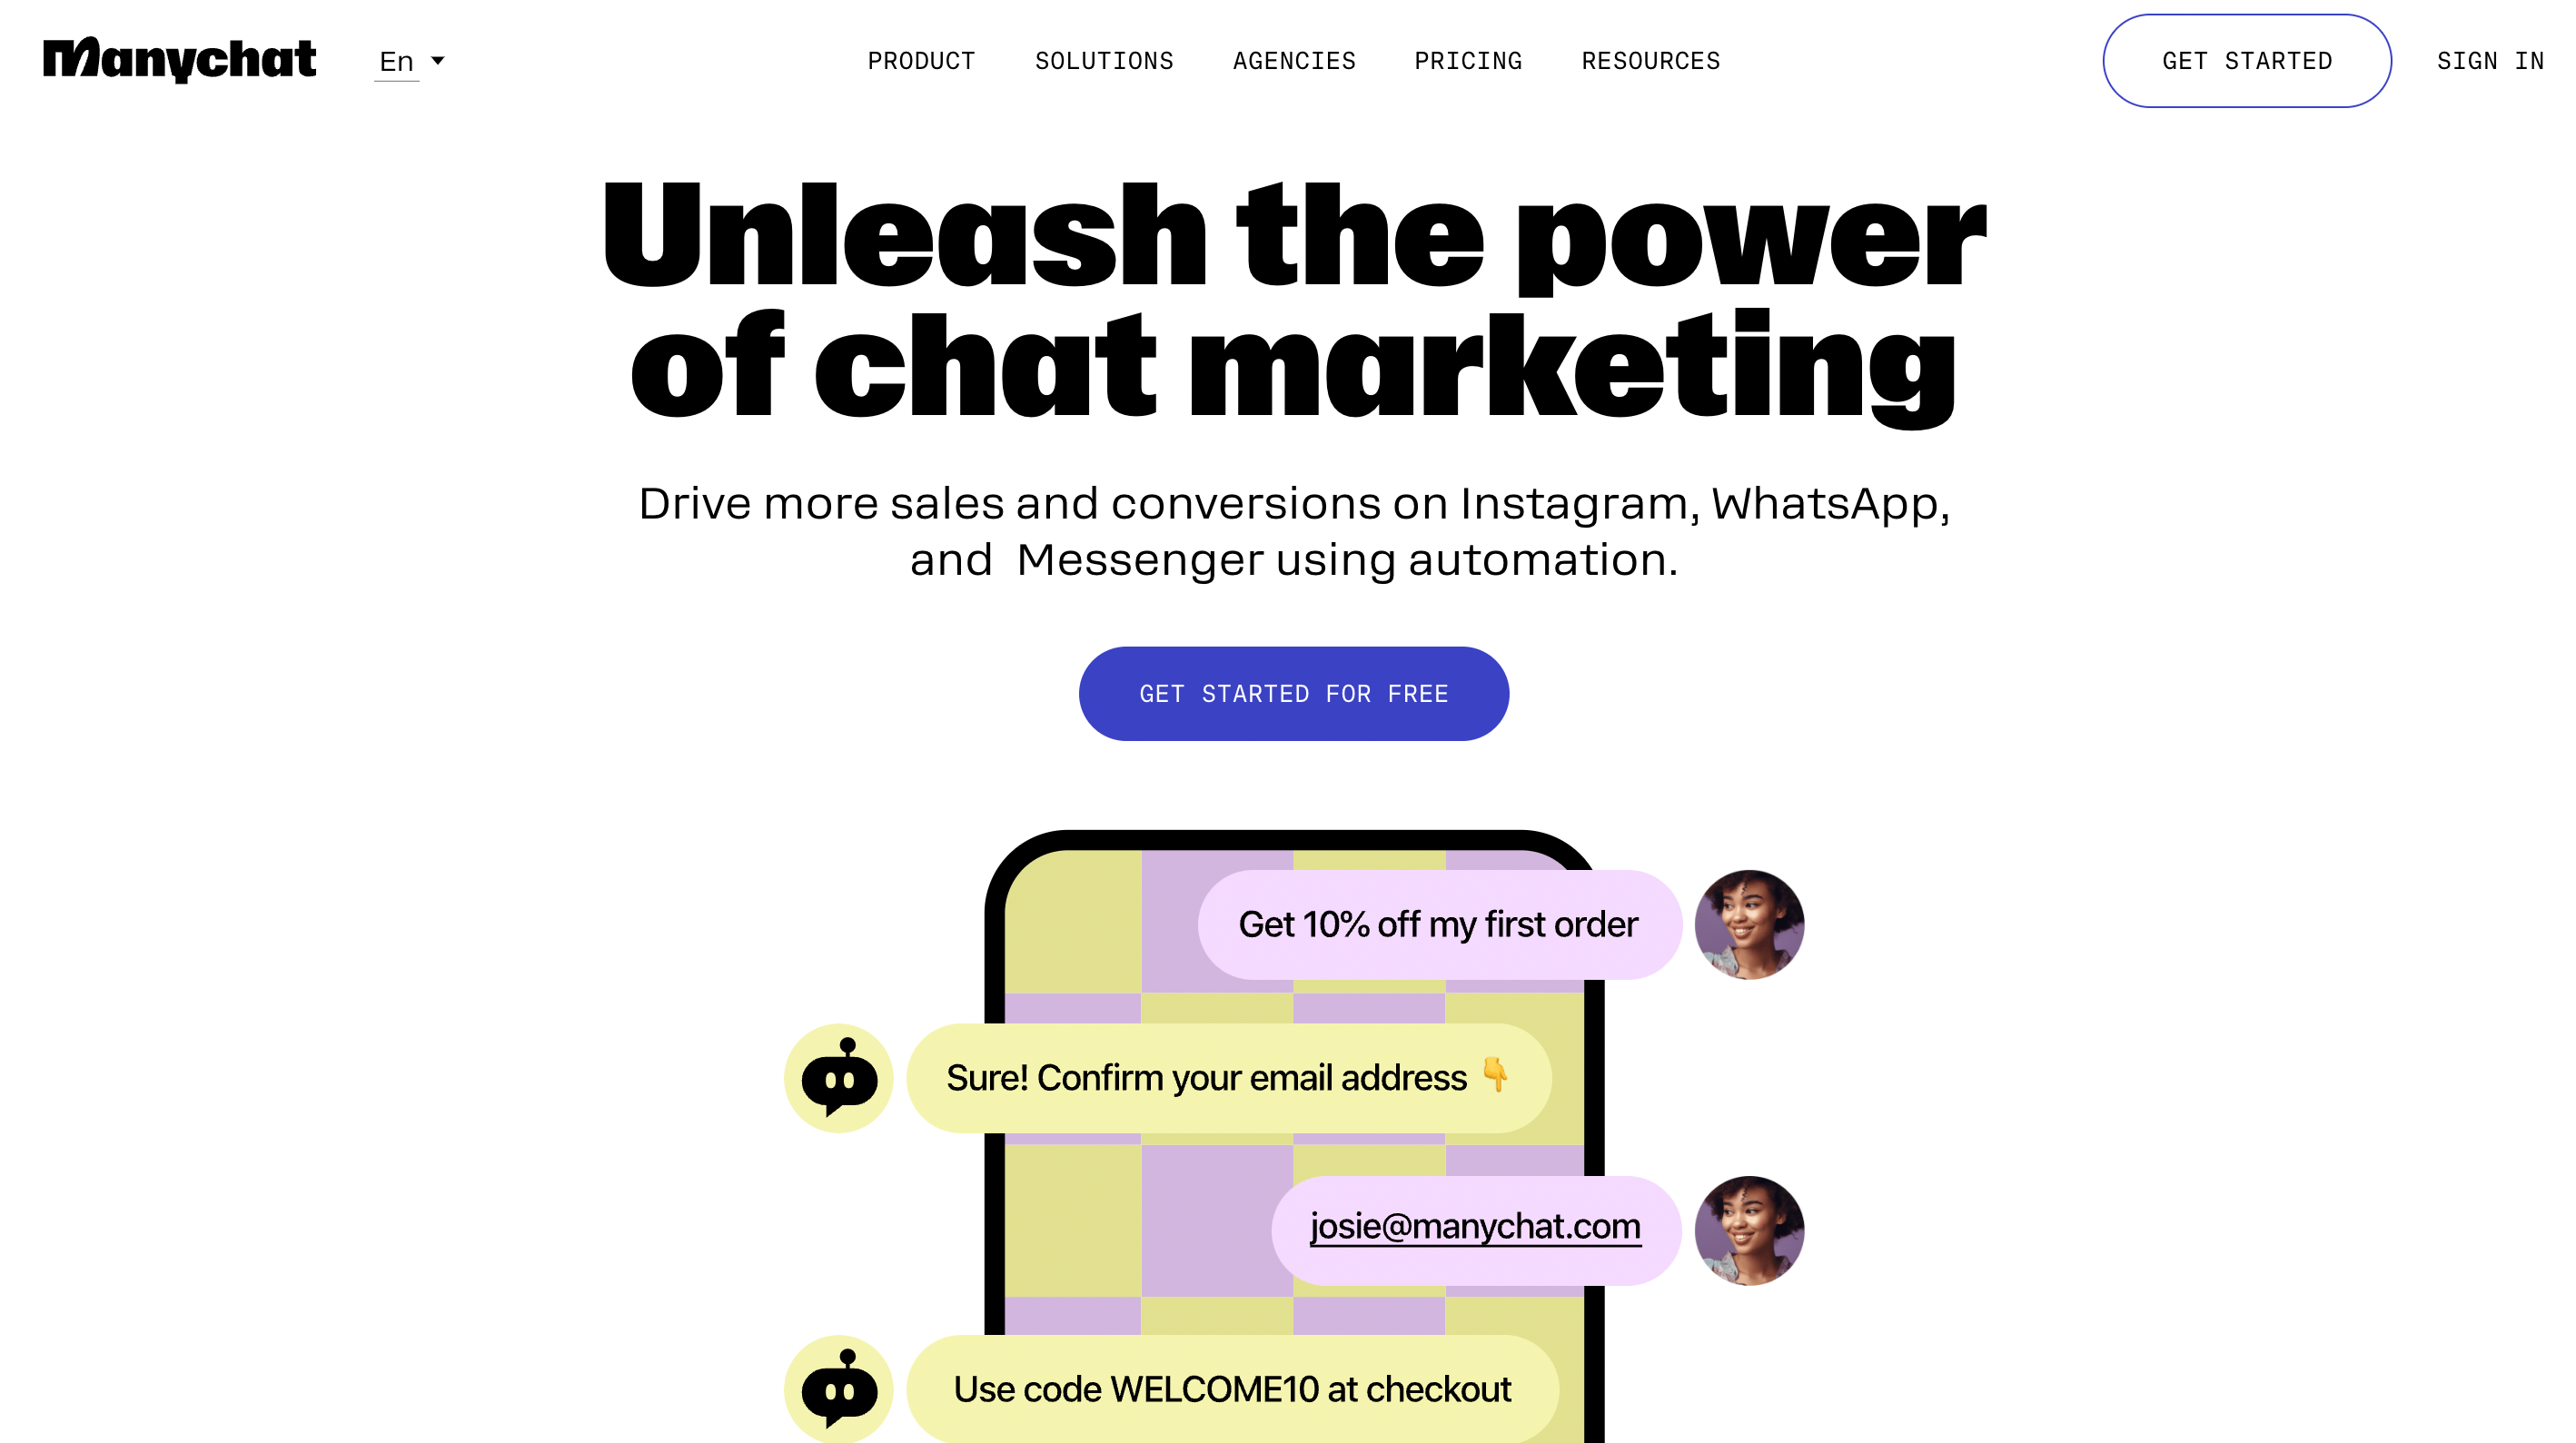 The Manychat home page, featuring a headline that says, “Unleash the power of chat marketing.”